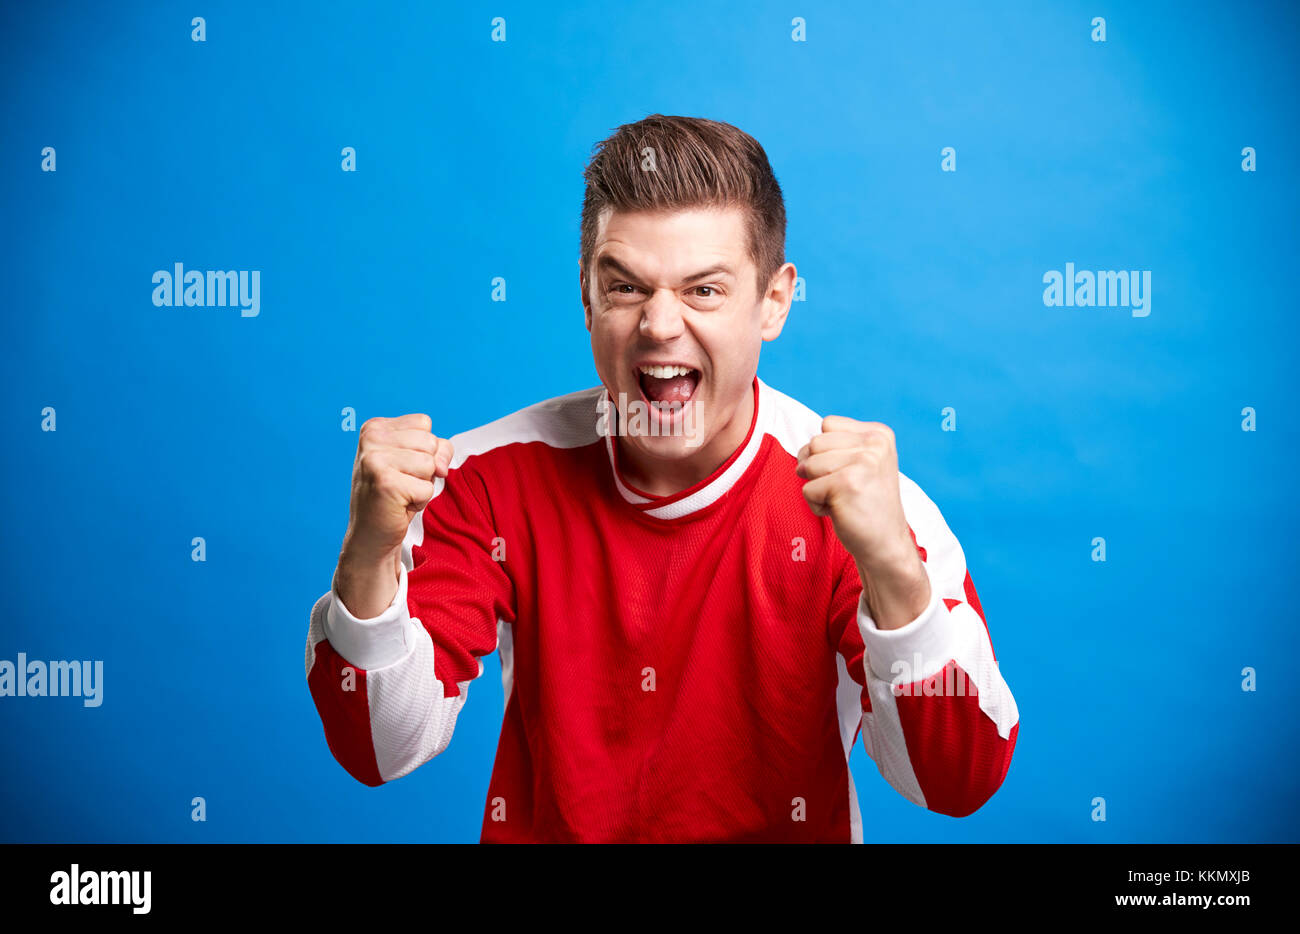 A young white male sports fan cheering and celebrating Stock Photo